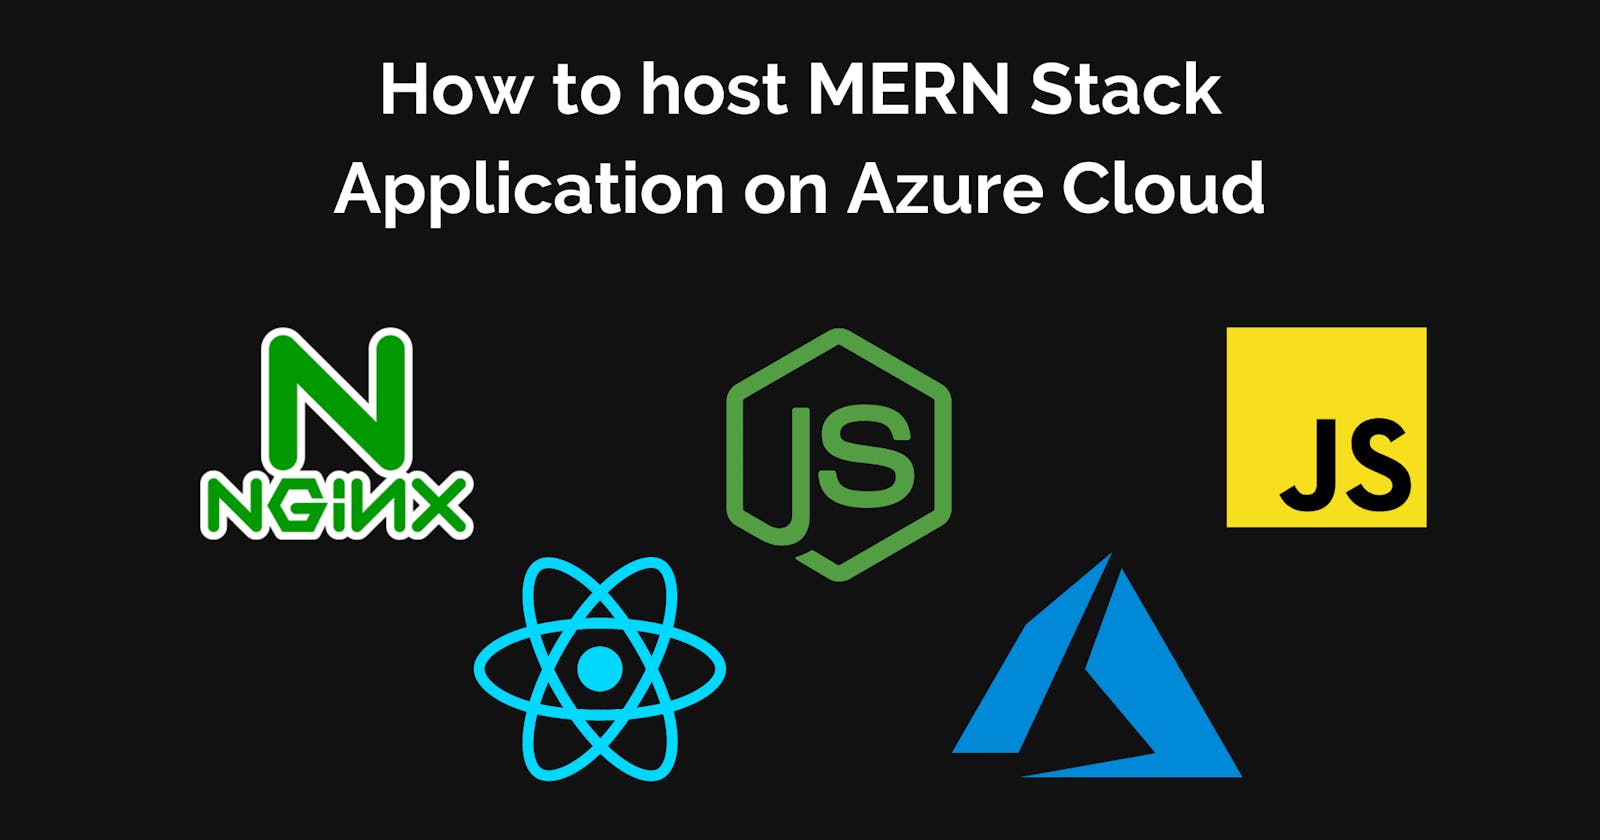 How to host MERN Stack Application on Azure Cloud